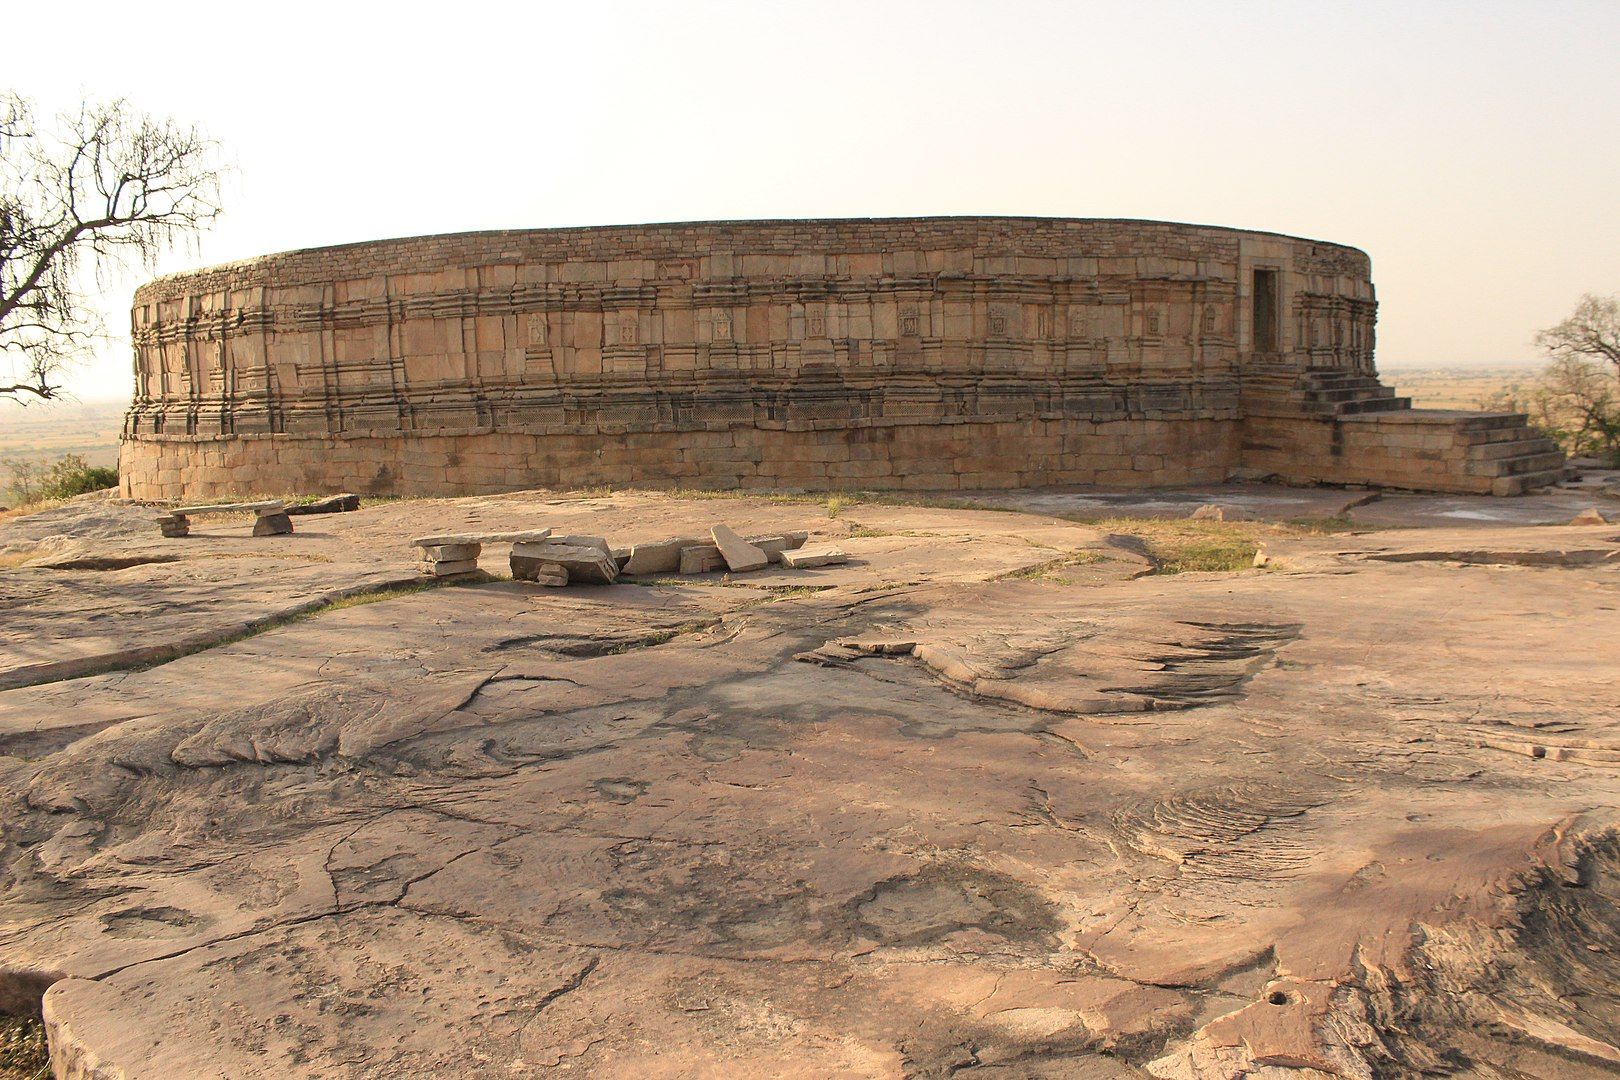 Chausanth Yogini Temple of Mitaoli – Inspiration for India’s Parliament House